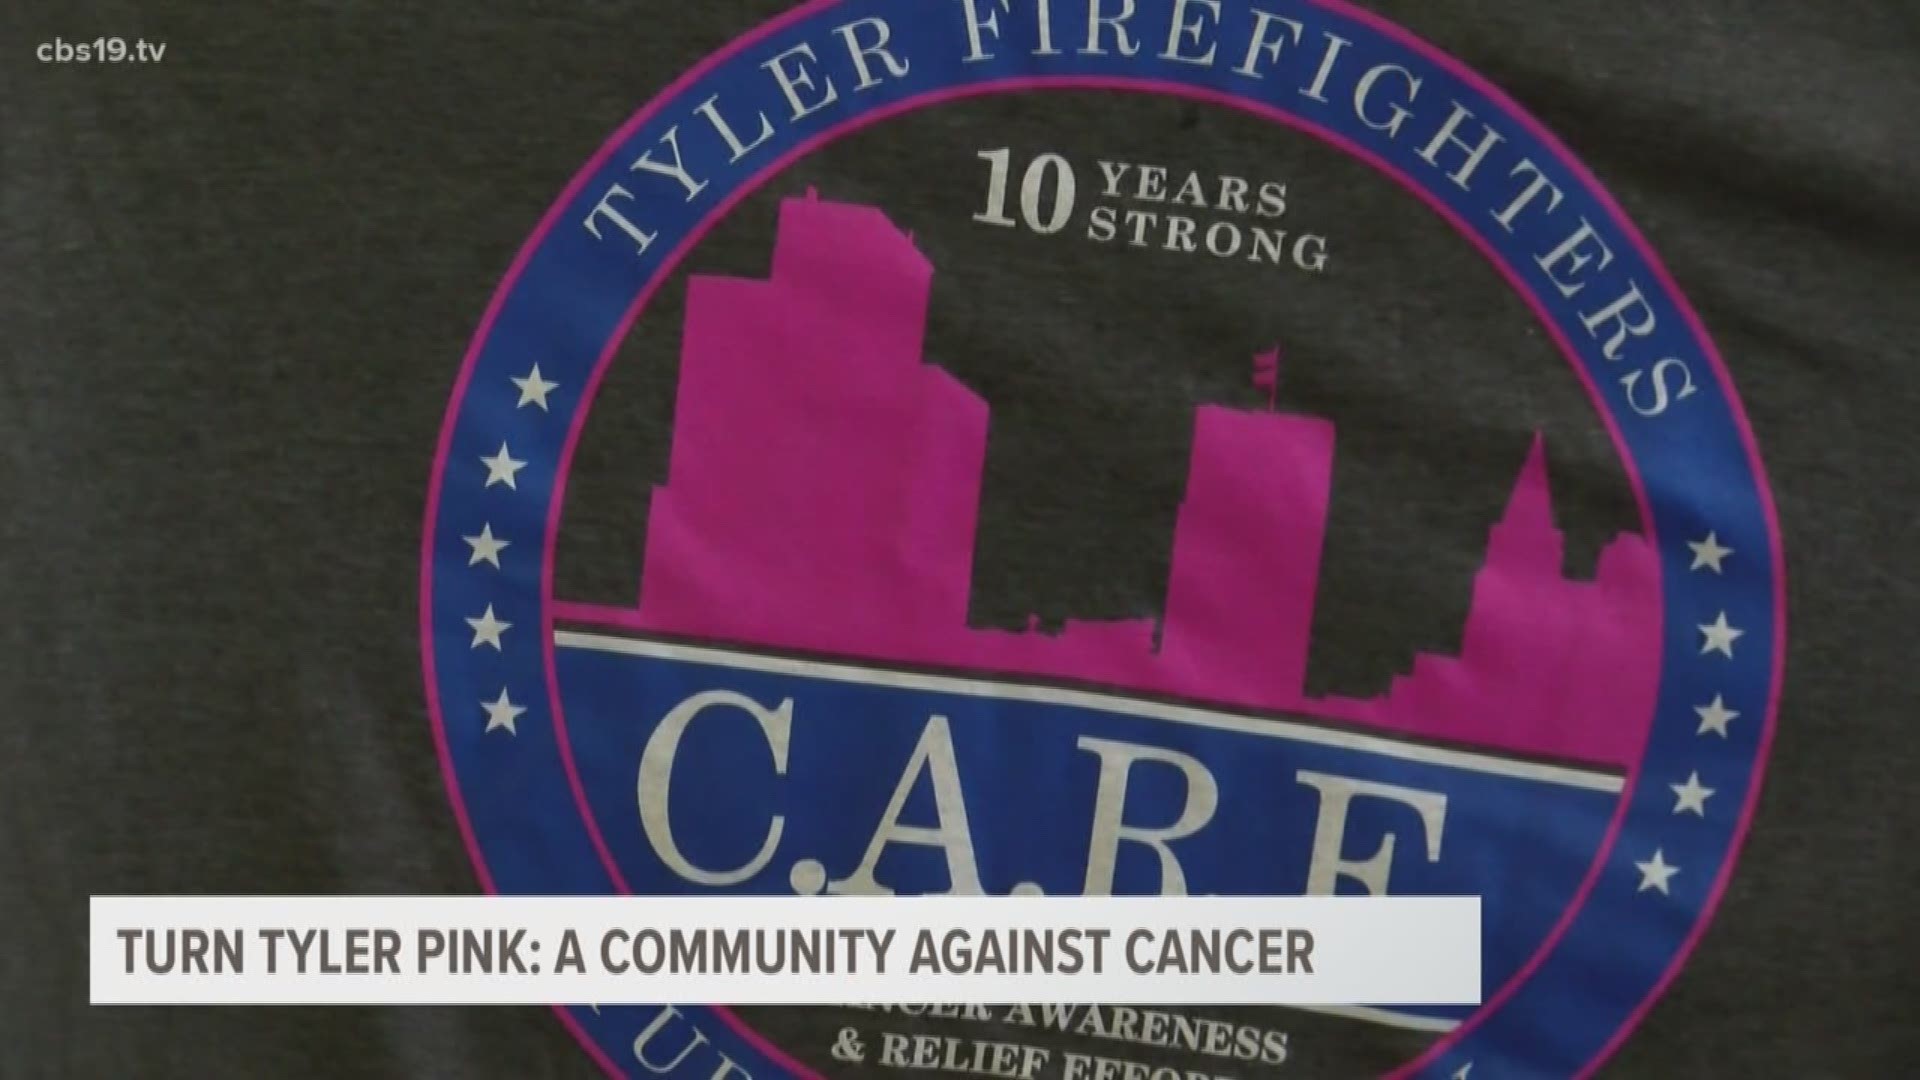 From 5 to 7 p.m. Tuesday evening, Turn Tyler Pink offers entertainment, education, and awareness while raising money for the fight against cancer.